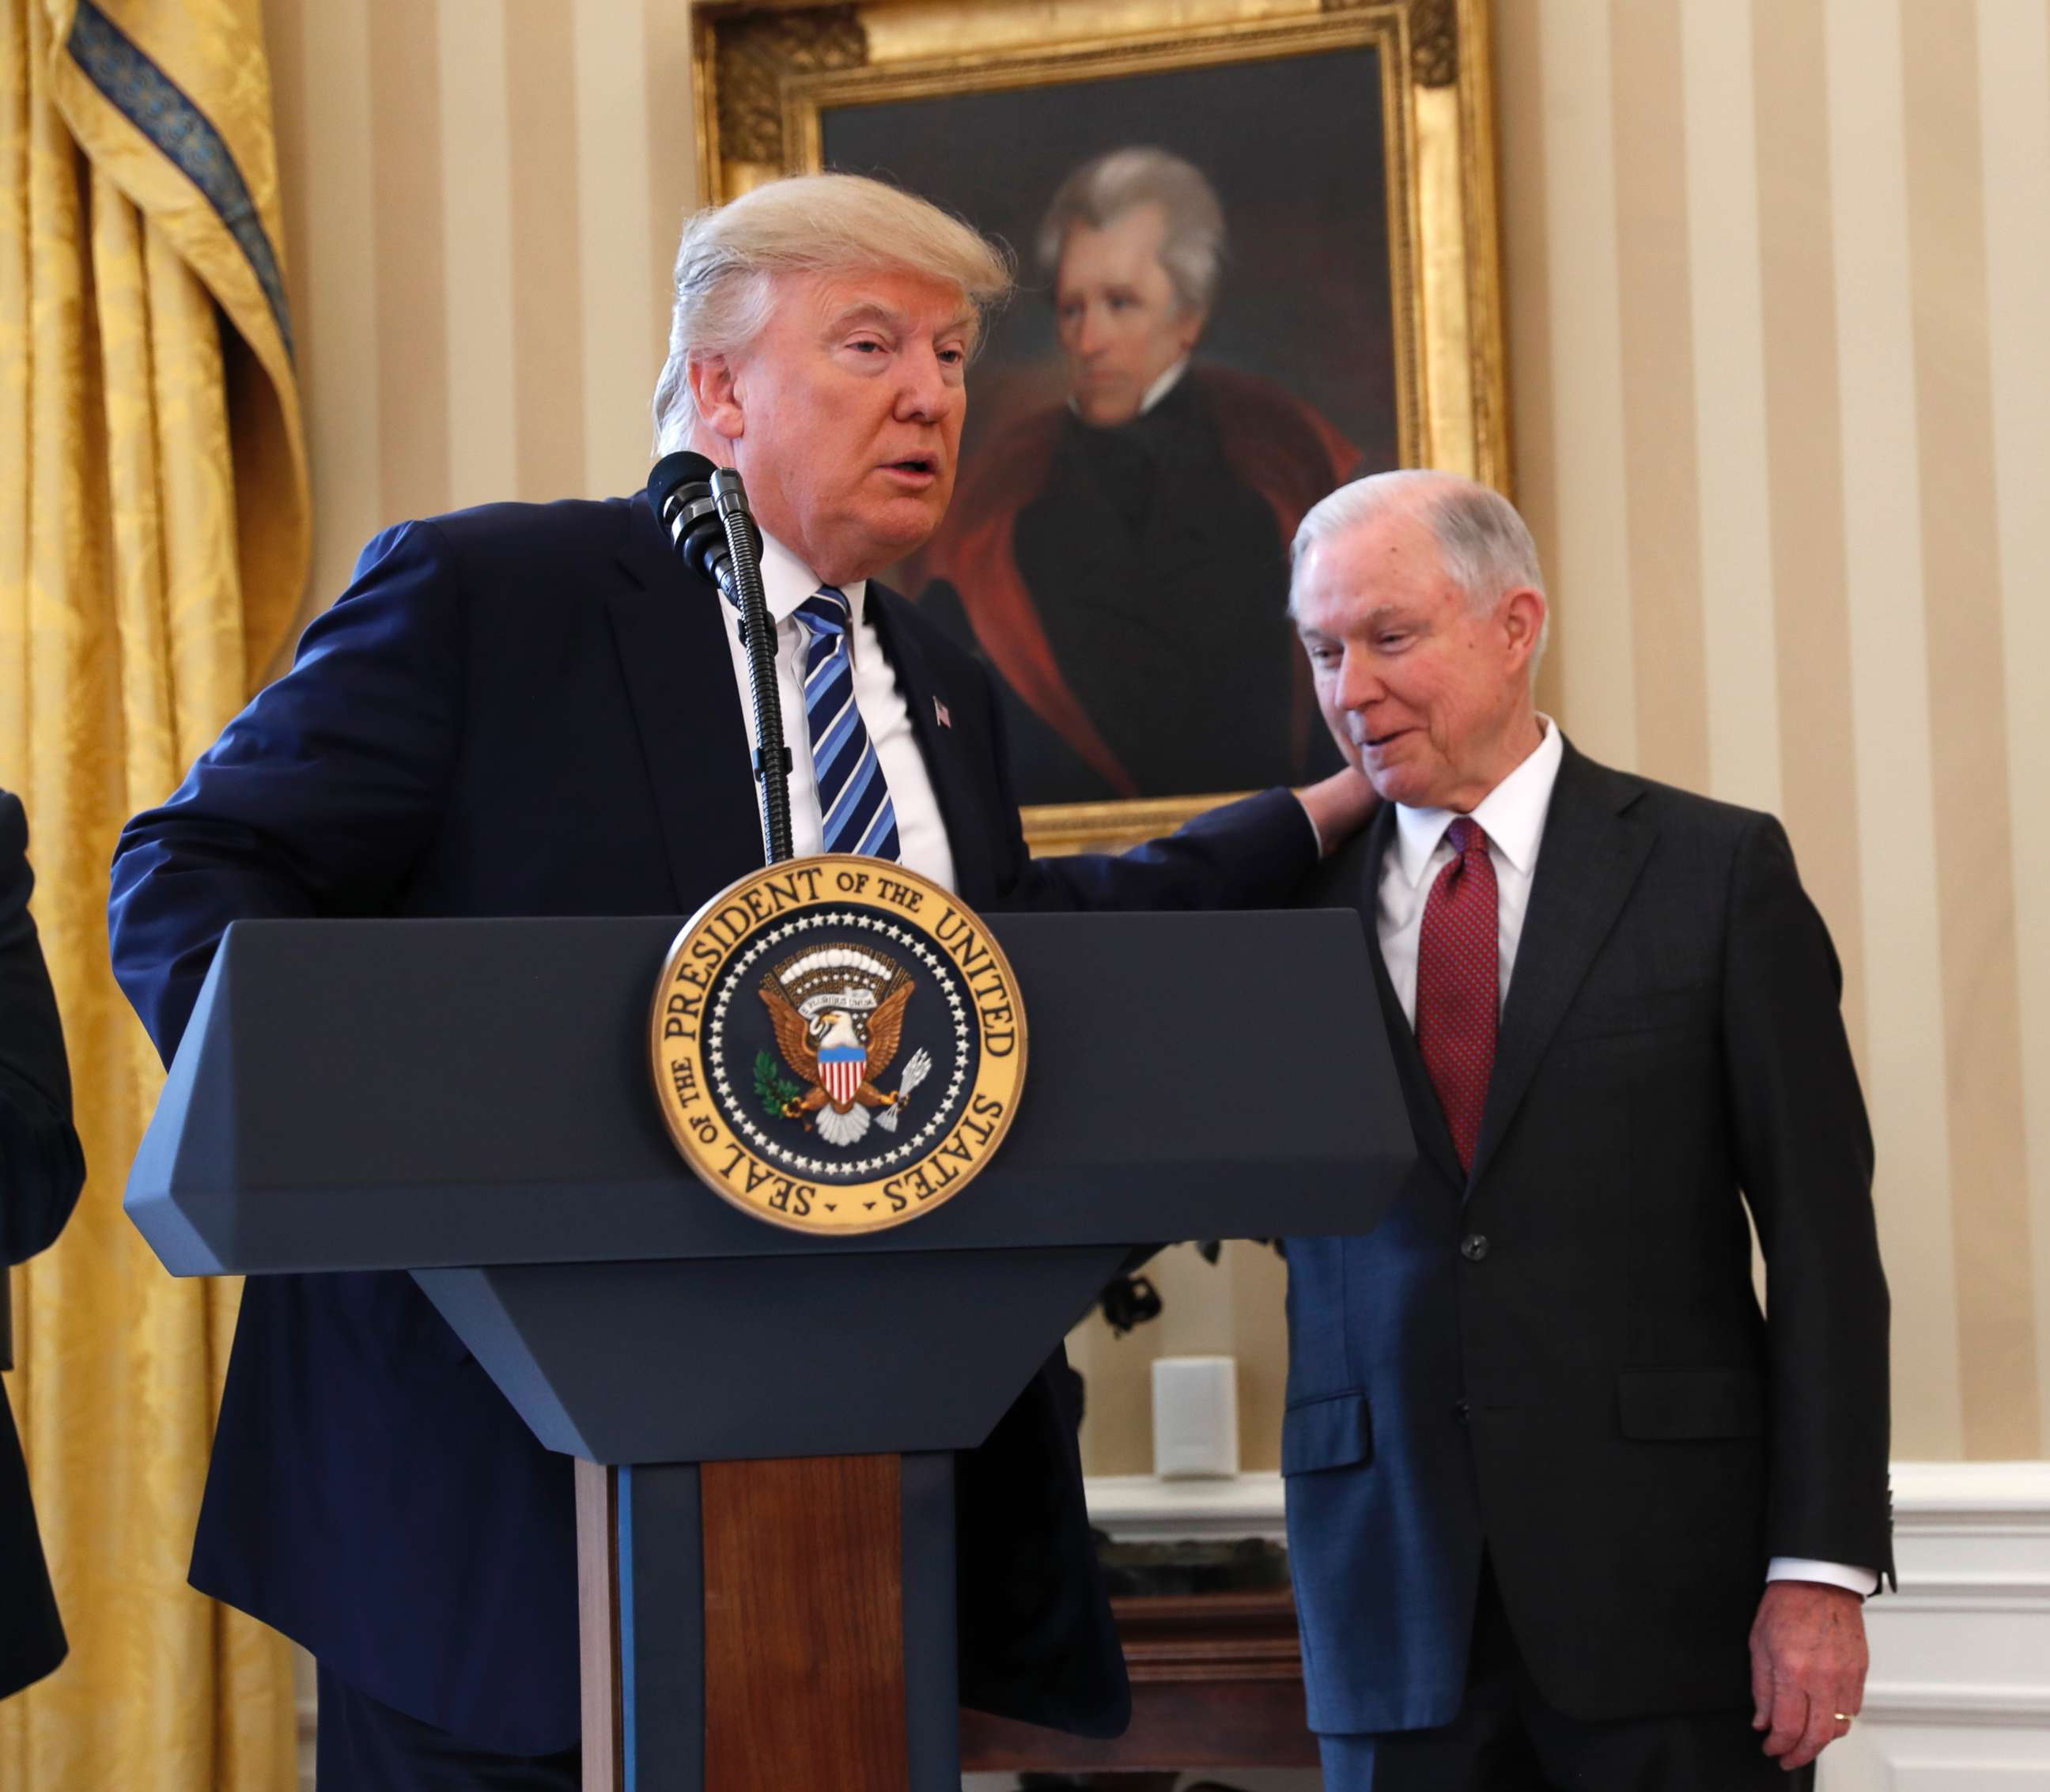 PHOTO: President Donald Trump talks to Attorney General Jeff Sessions in the Oval Office of the White House in Washington, Feb. 9, 2017, before Vice President Mike Pence administered the oath of office to Sessions.